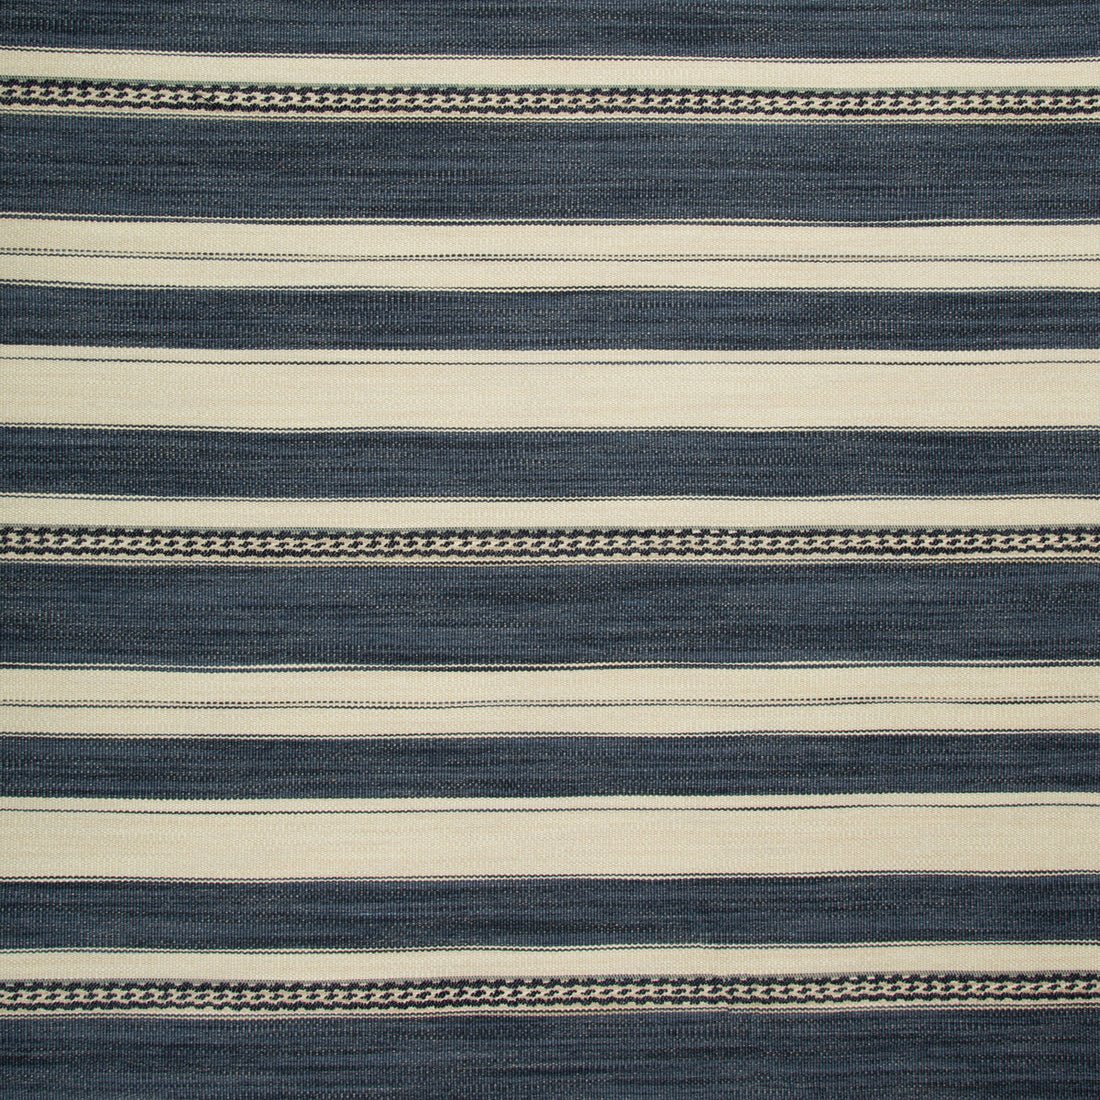 Entoto Stripe fabric in blue/indigo color - pattern 2017143.550.0 - by Lee Jofa in the Merkato collection